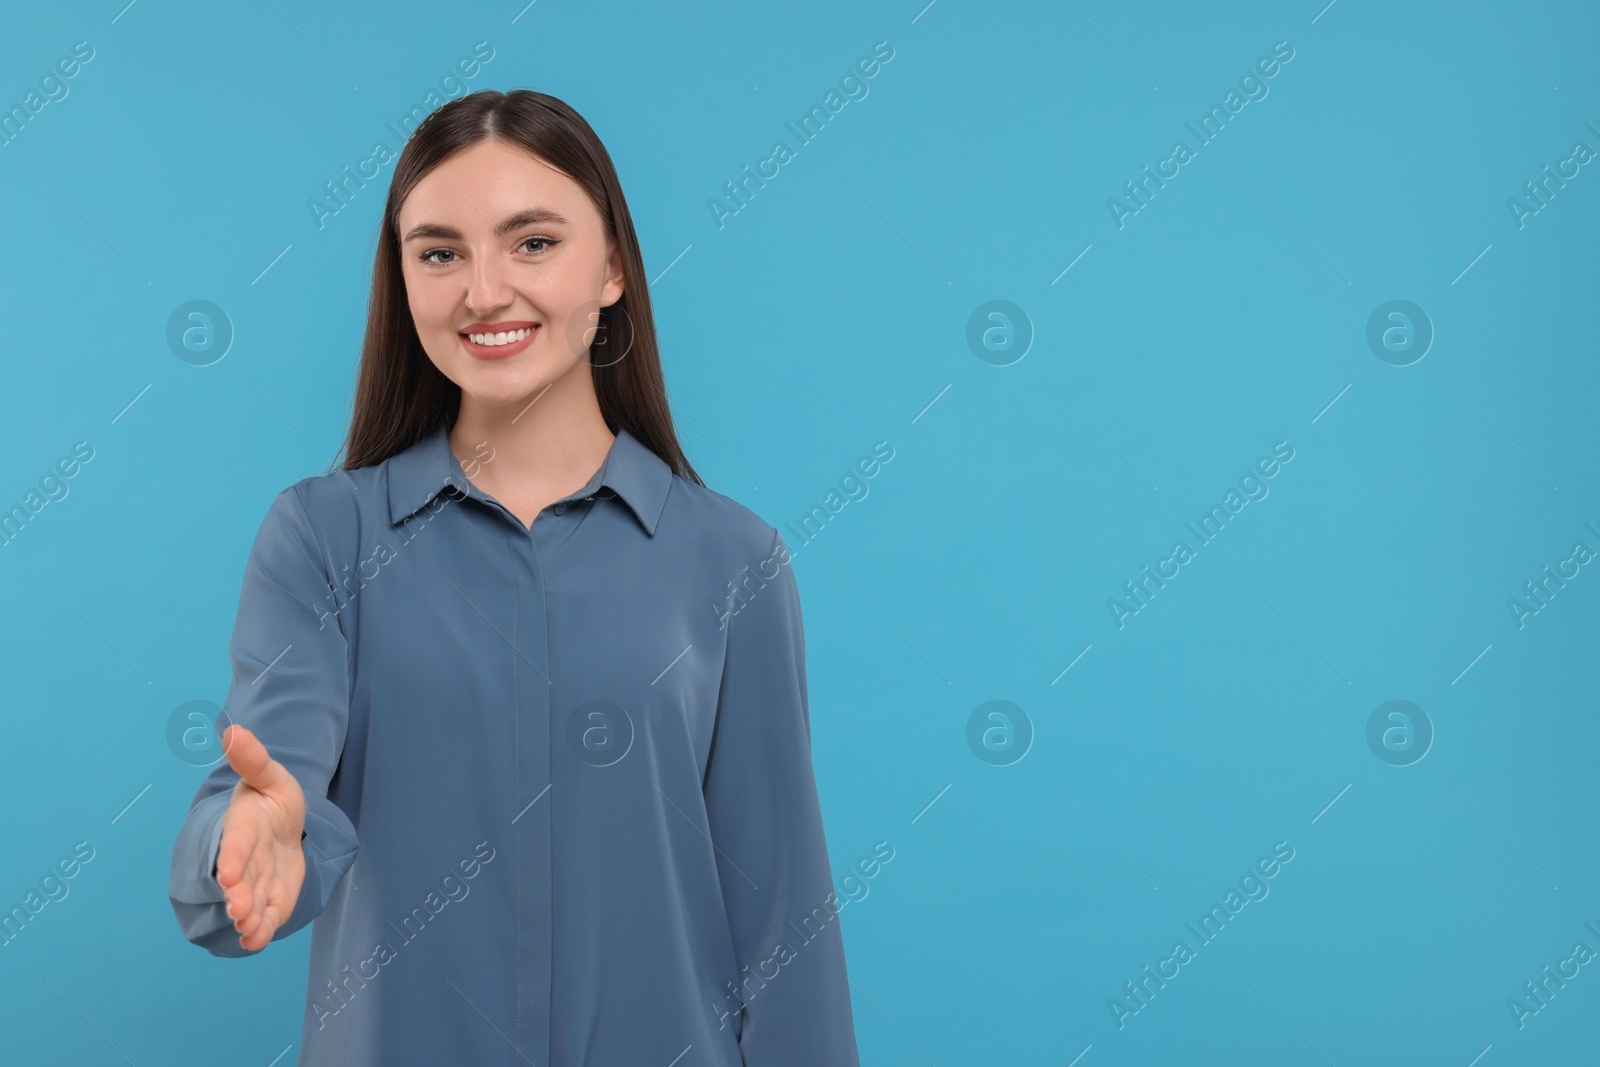 Photo of Smiling woman welcoming and offering handshake on light blue background. Space for text